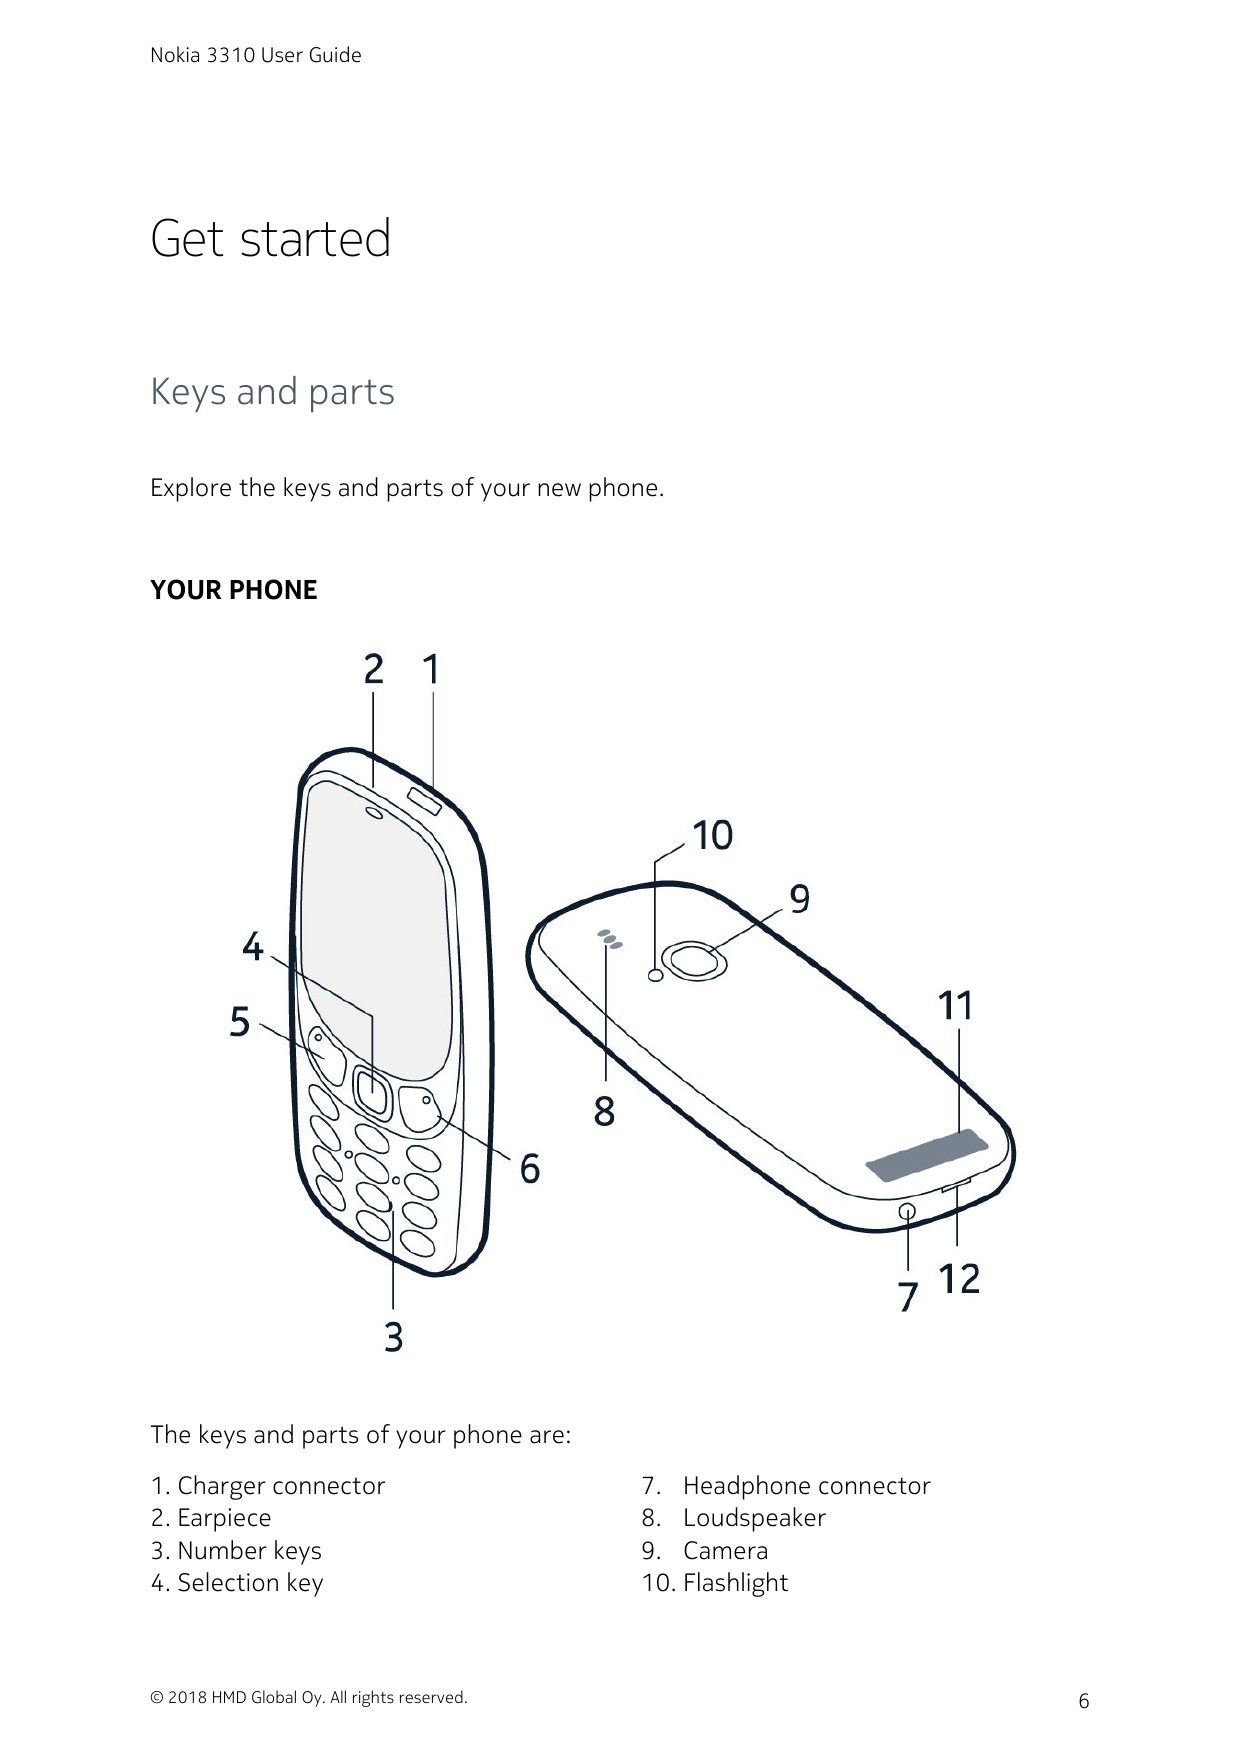 Nokia 3310 User GuideGet startedKeys and partsExplore the keys and parts of your new phone.YOUR PHONEThe keys and parts of your 